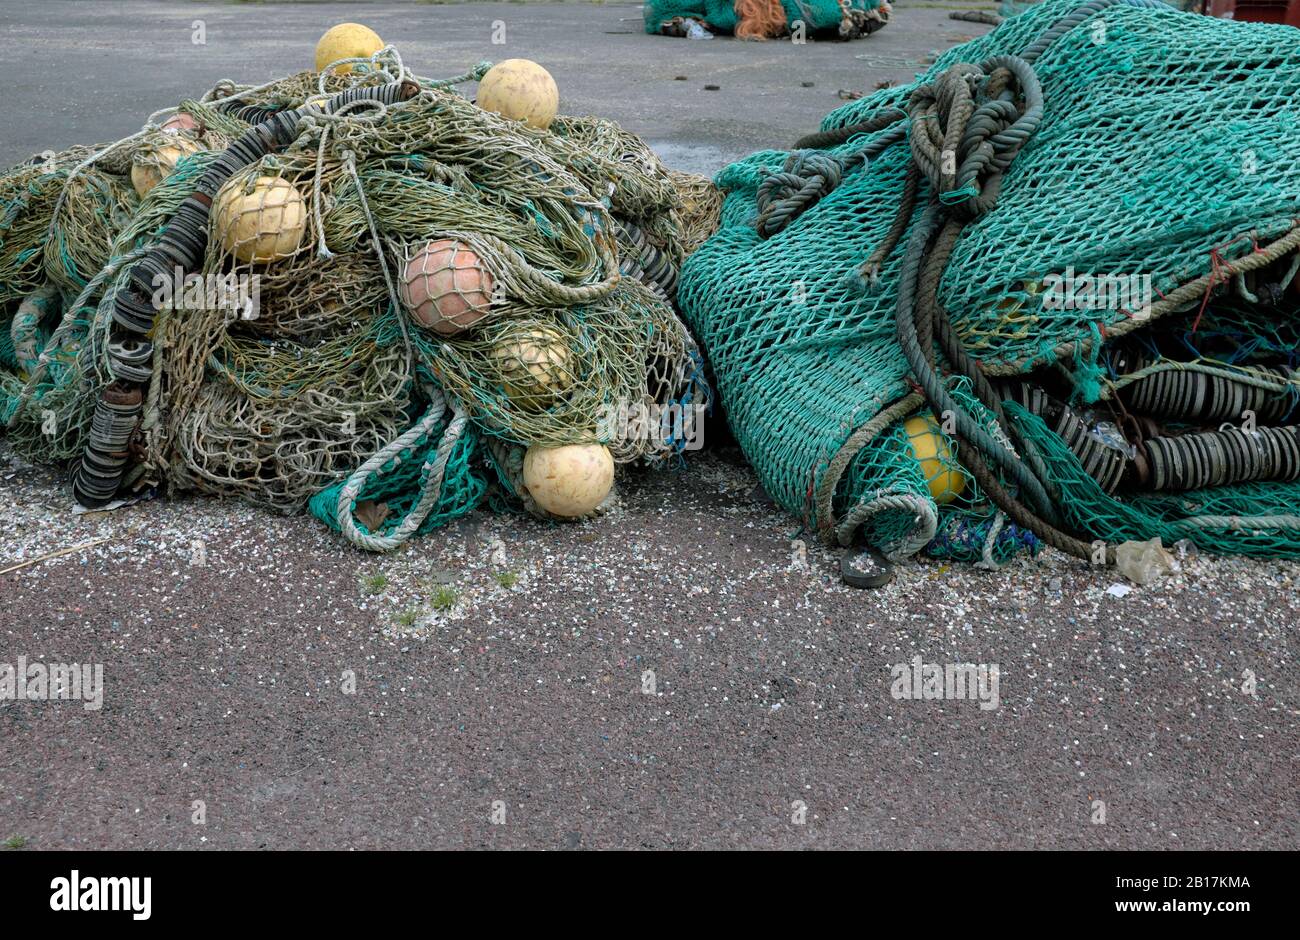 France, Brittany, Audierne, Fishing nets and buoys in harbor Stock Photo